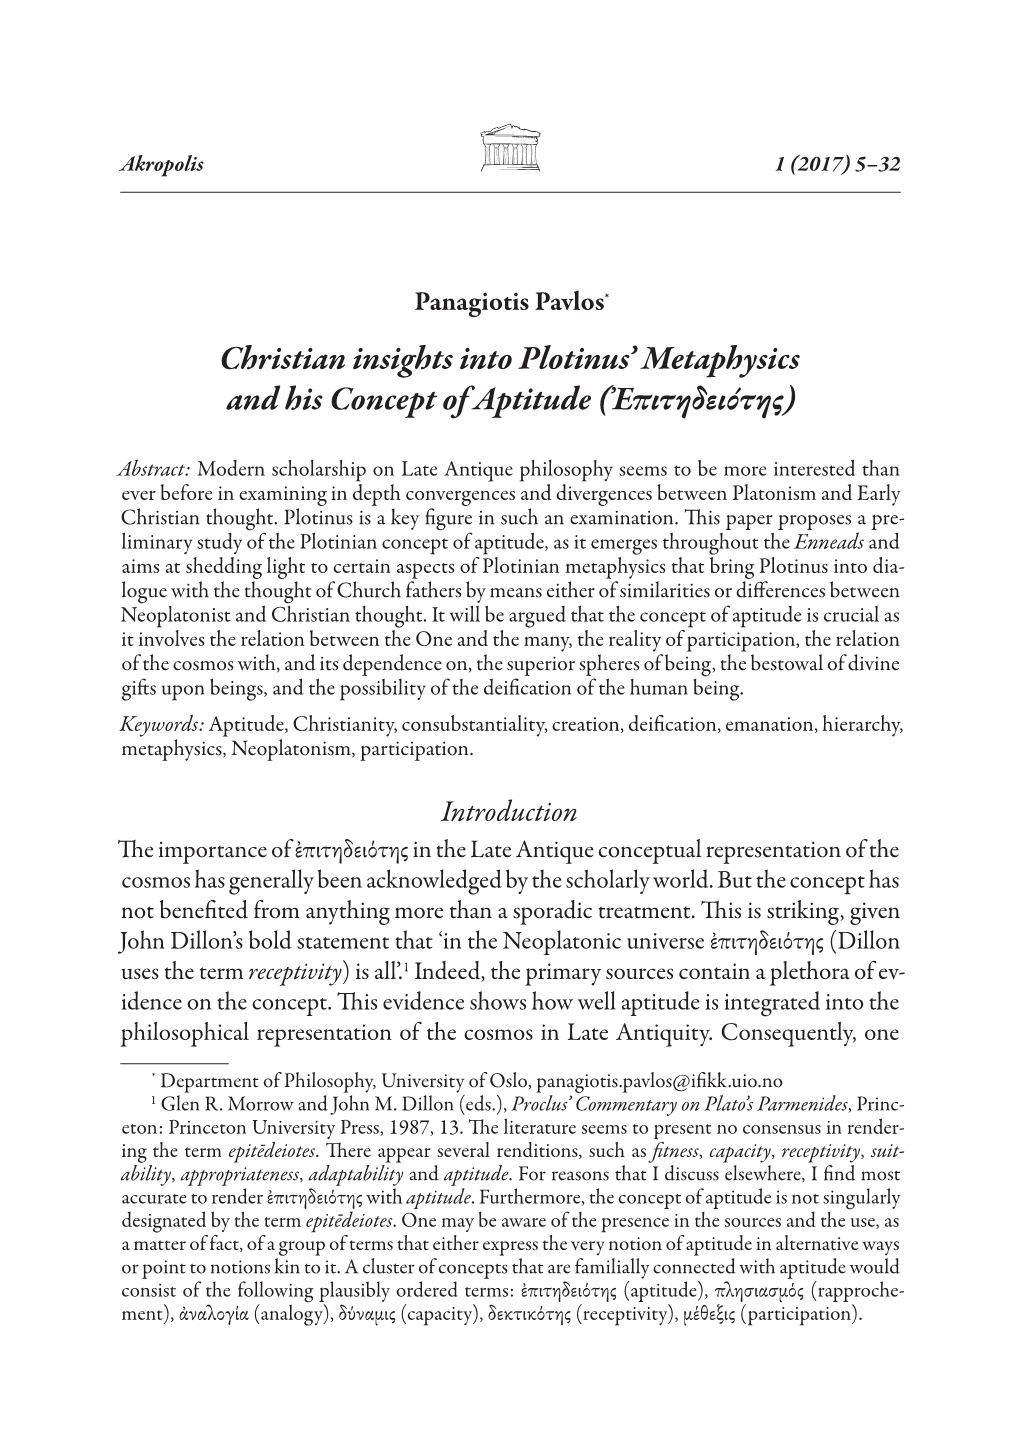 Christian Insights Into Plotinus' Metaphysics and His Concept Of